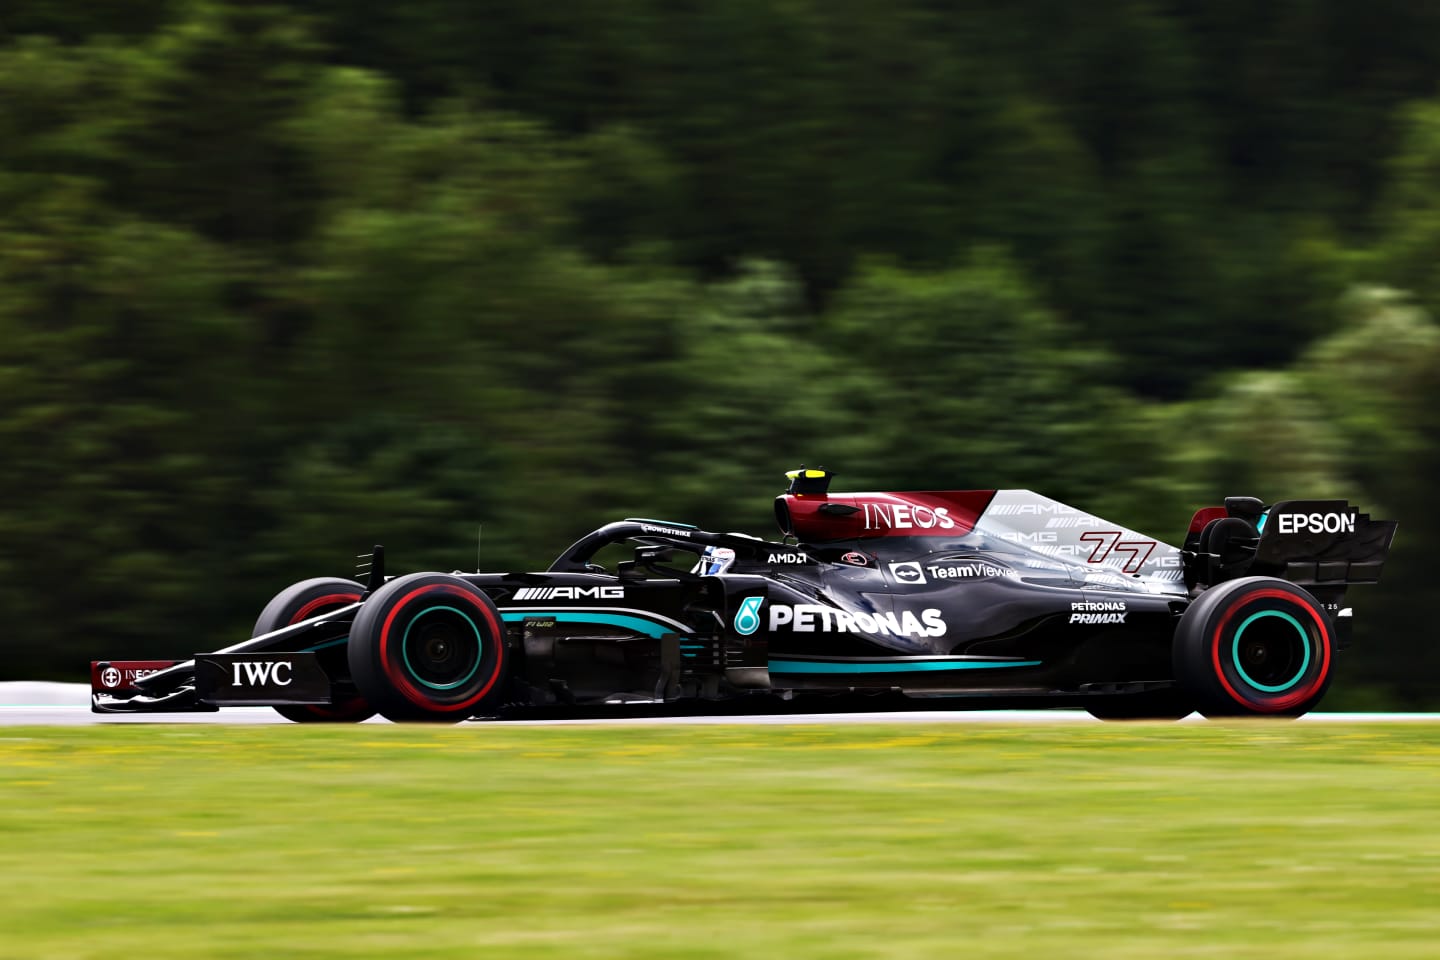 SPIELBERG, AUSTRIA - JUNE 25: Valtteri Bottas of Finland driving the (77) Mercedes AMG Petronas F1 Team Mercedes W12 on track during practice ahead of the F1 Grand Prix of Styria at Red Bull Ring on June 25, 2021 in Spielberg, Austria. (Photo by Clive Rose/Getty Images)